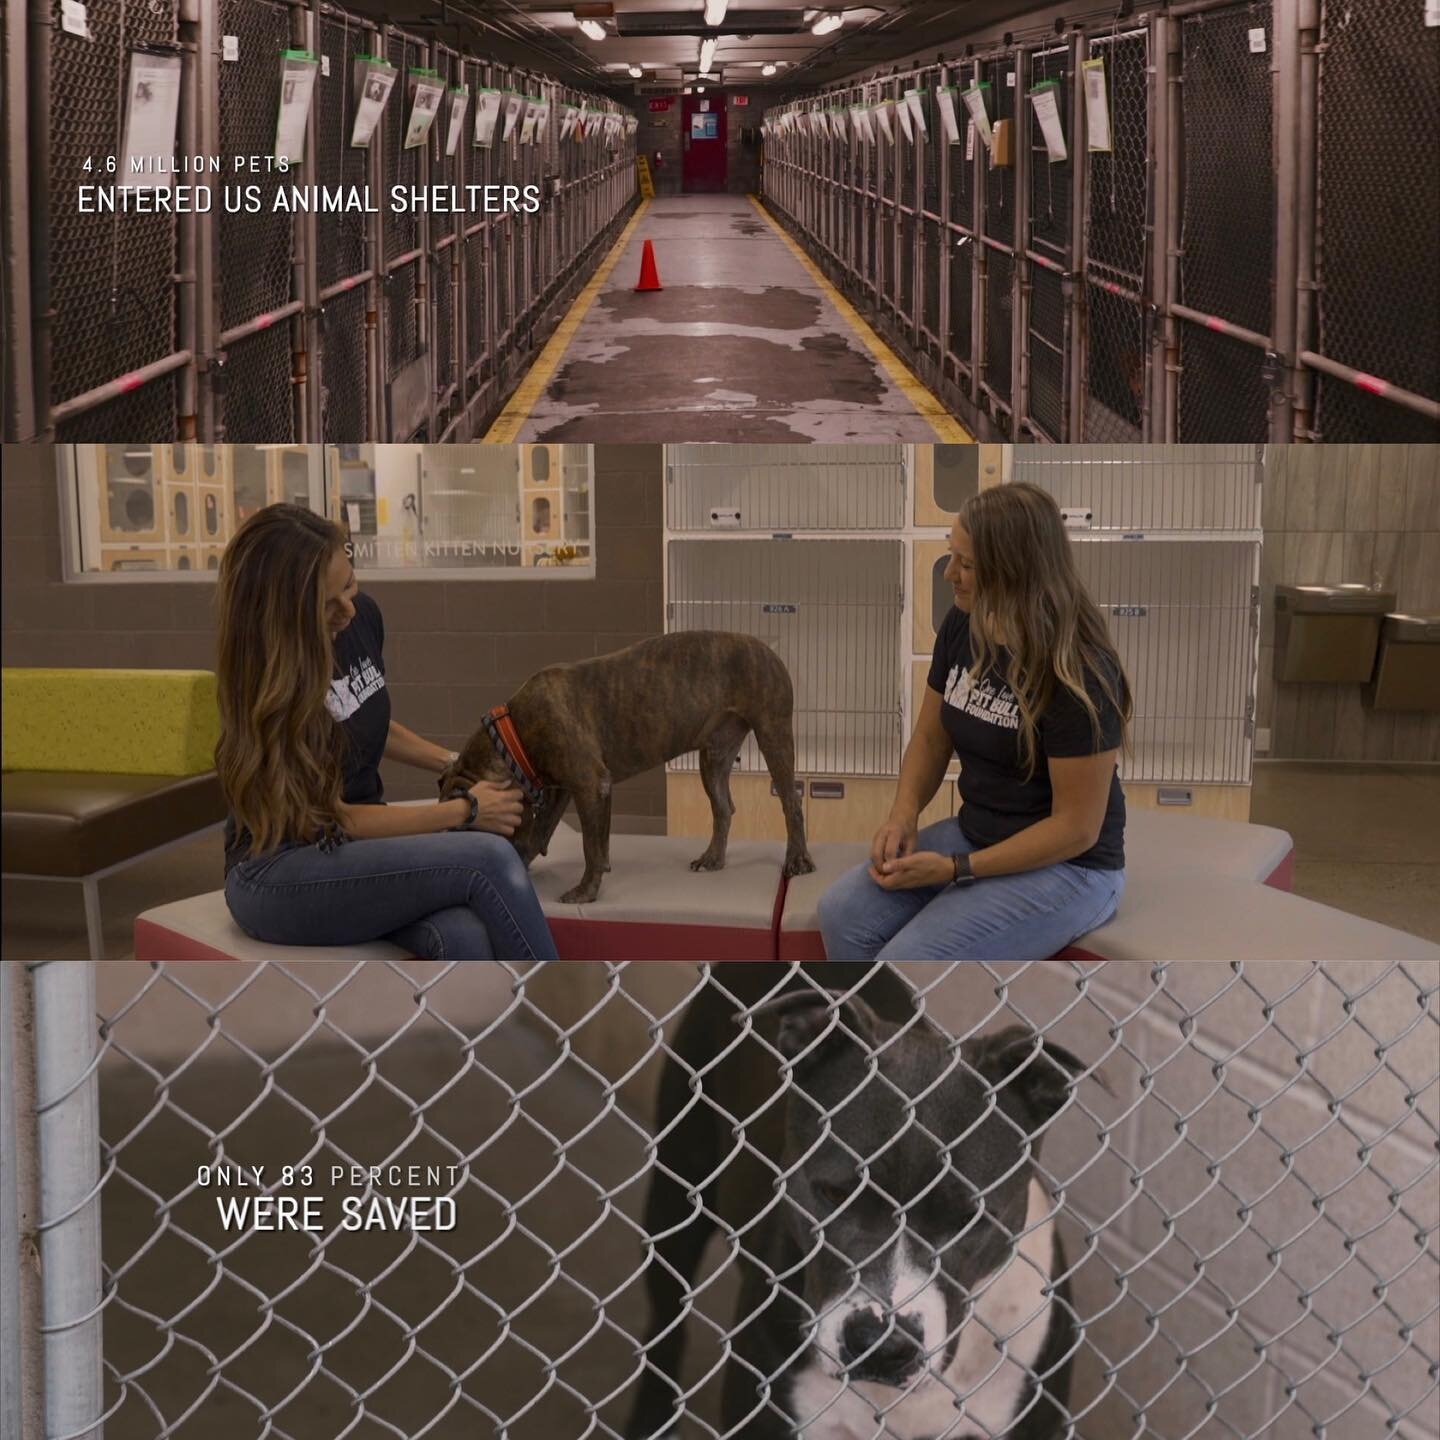 Here are some screen grabs from a 30 second + 1 minute commercial spot created for @onelovearizona 🎥 🐕

This is truly one amazing group of people who passionately care and advocate for pit bulls and shelter dogs &mdash; not only encouraging adoptio